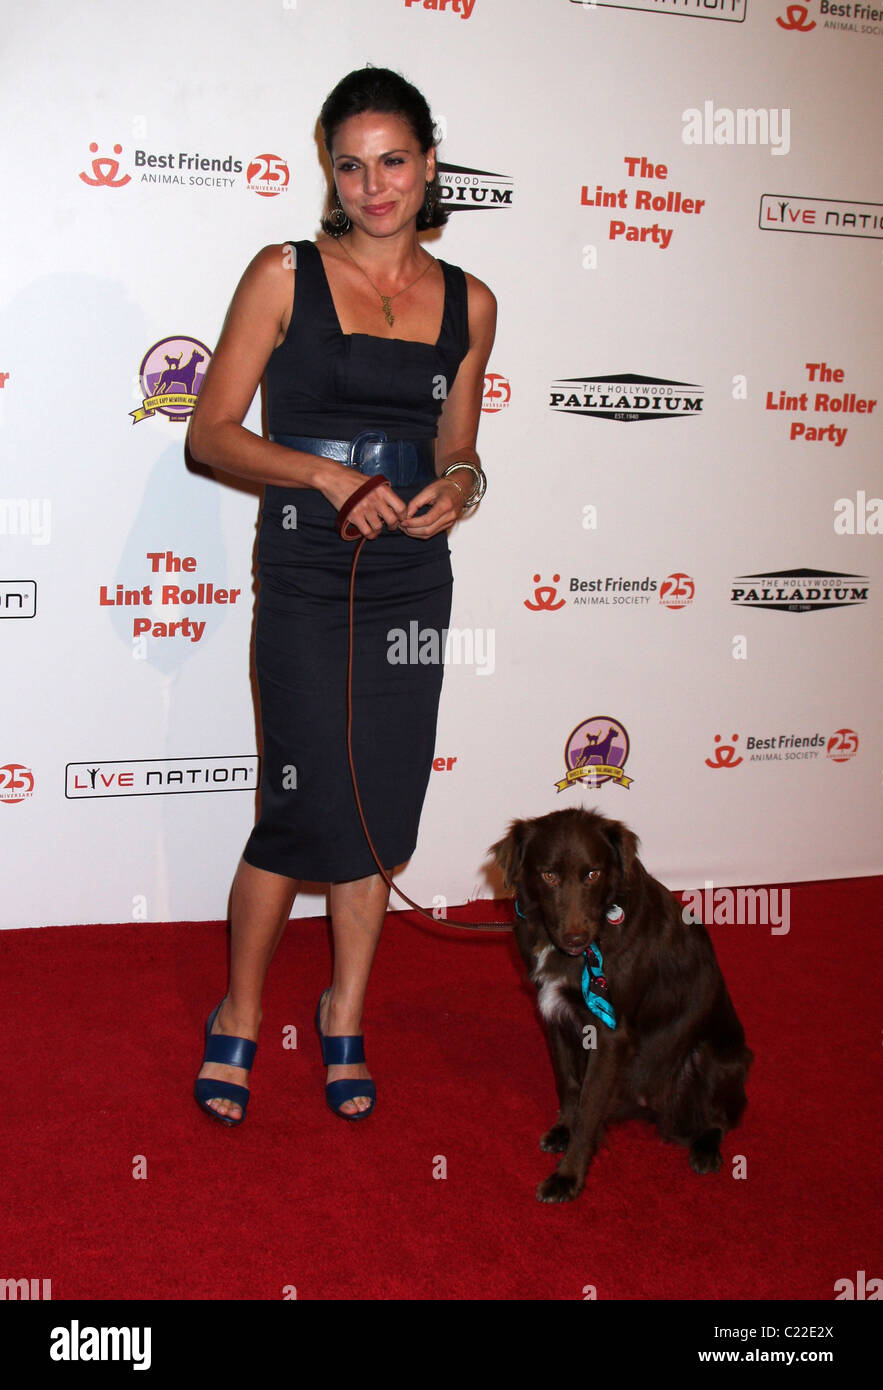 Lana Parrilla & her dog The 2009 Lint Roller Party - Arrivals Los Angeles,  California - 03.10.09 Nikki Nelson Stock Photo - Alamy